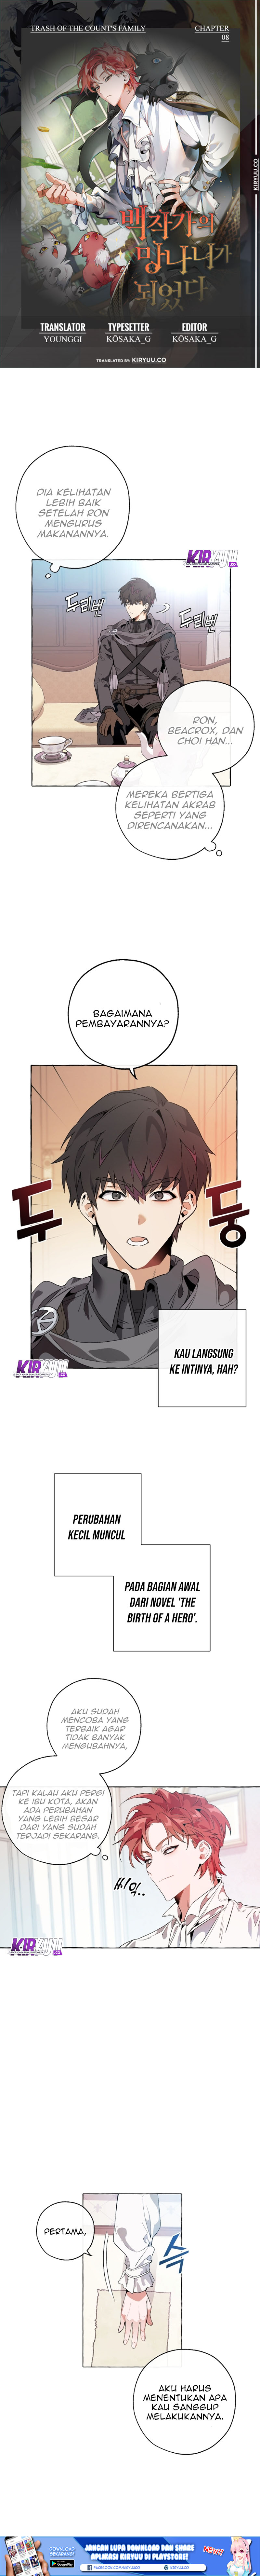 Lord Incheon Chapter 08 - 61